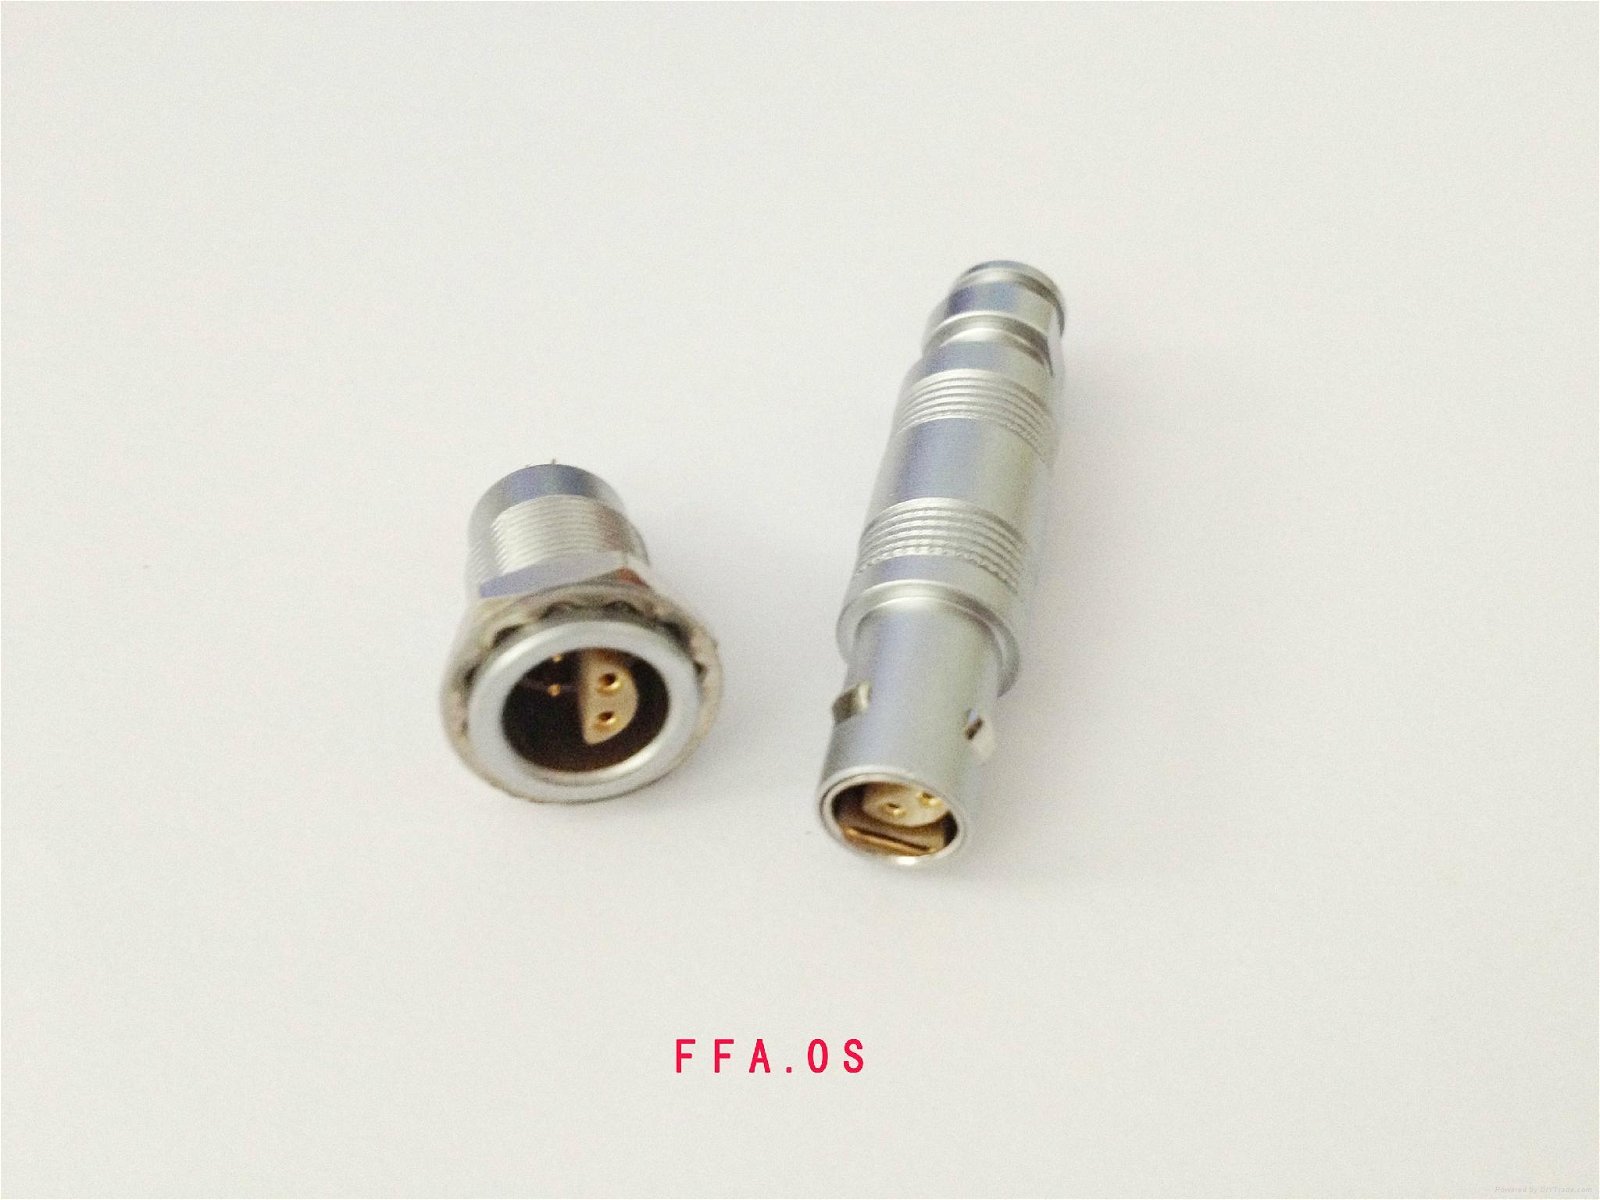 lemo odu fischer FGG 00S 250 push pull self latching connector for medical devic 2